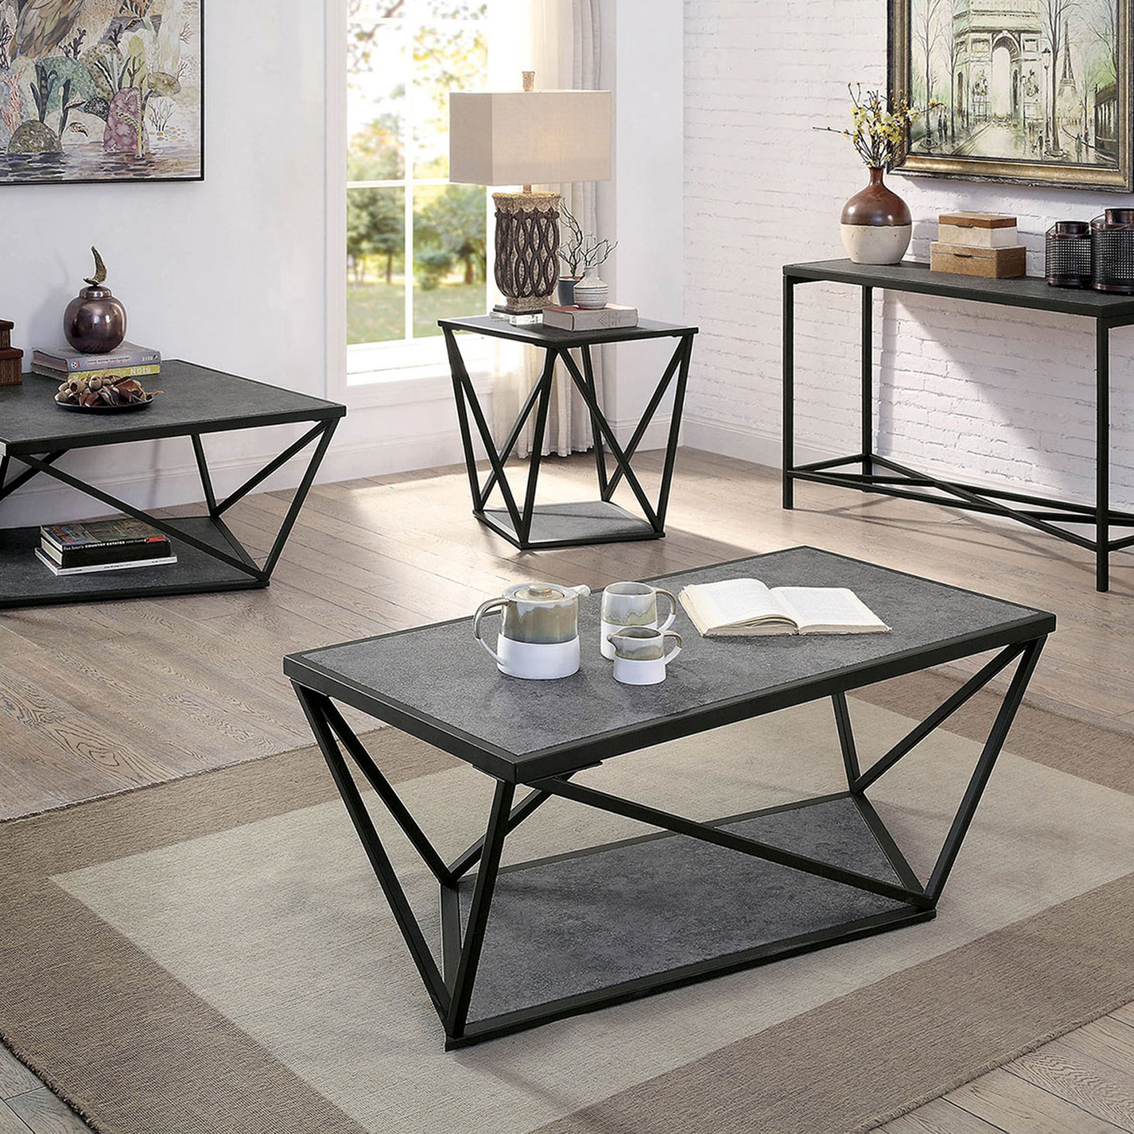 Furniture of America Ciana Rectangular Cocktail Table - Image 2 of 2